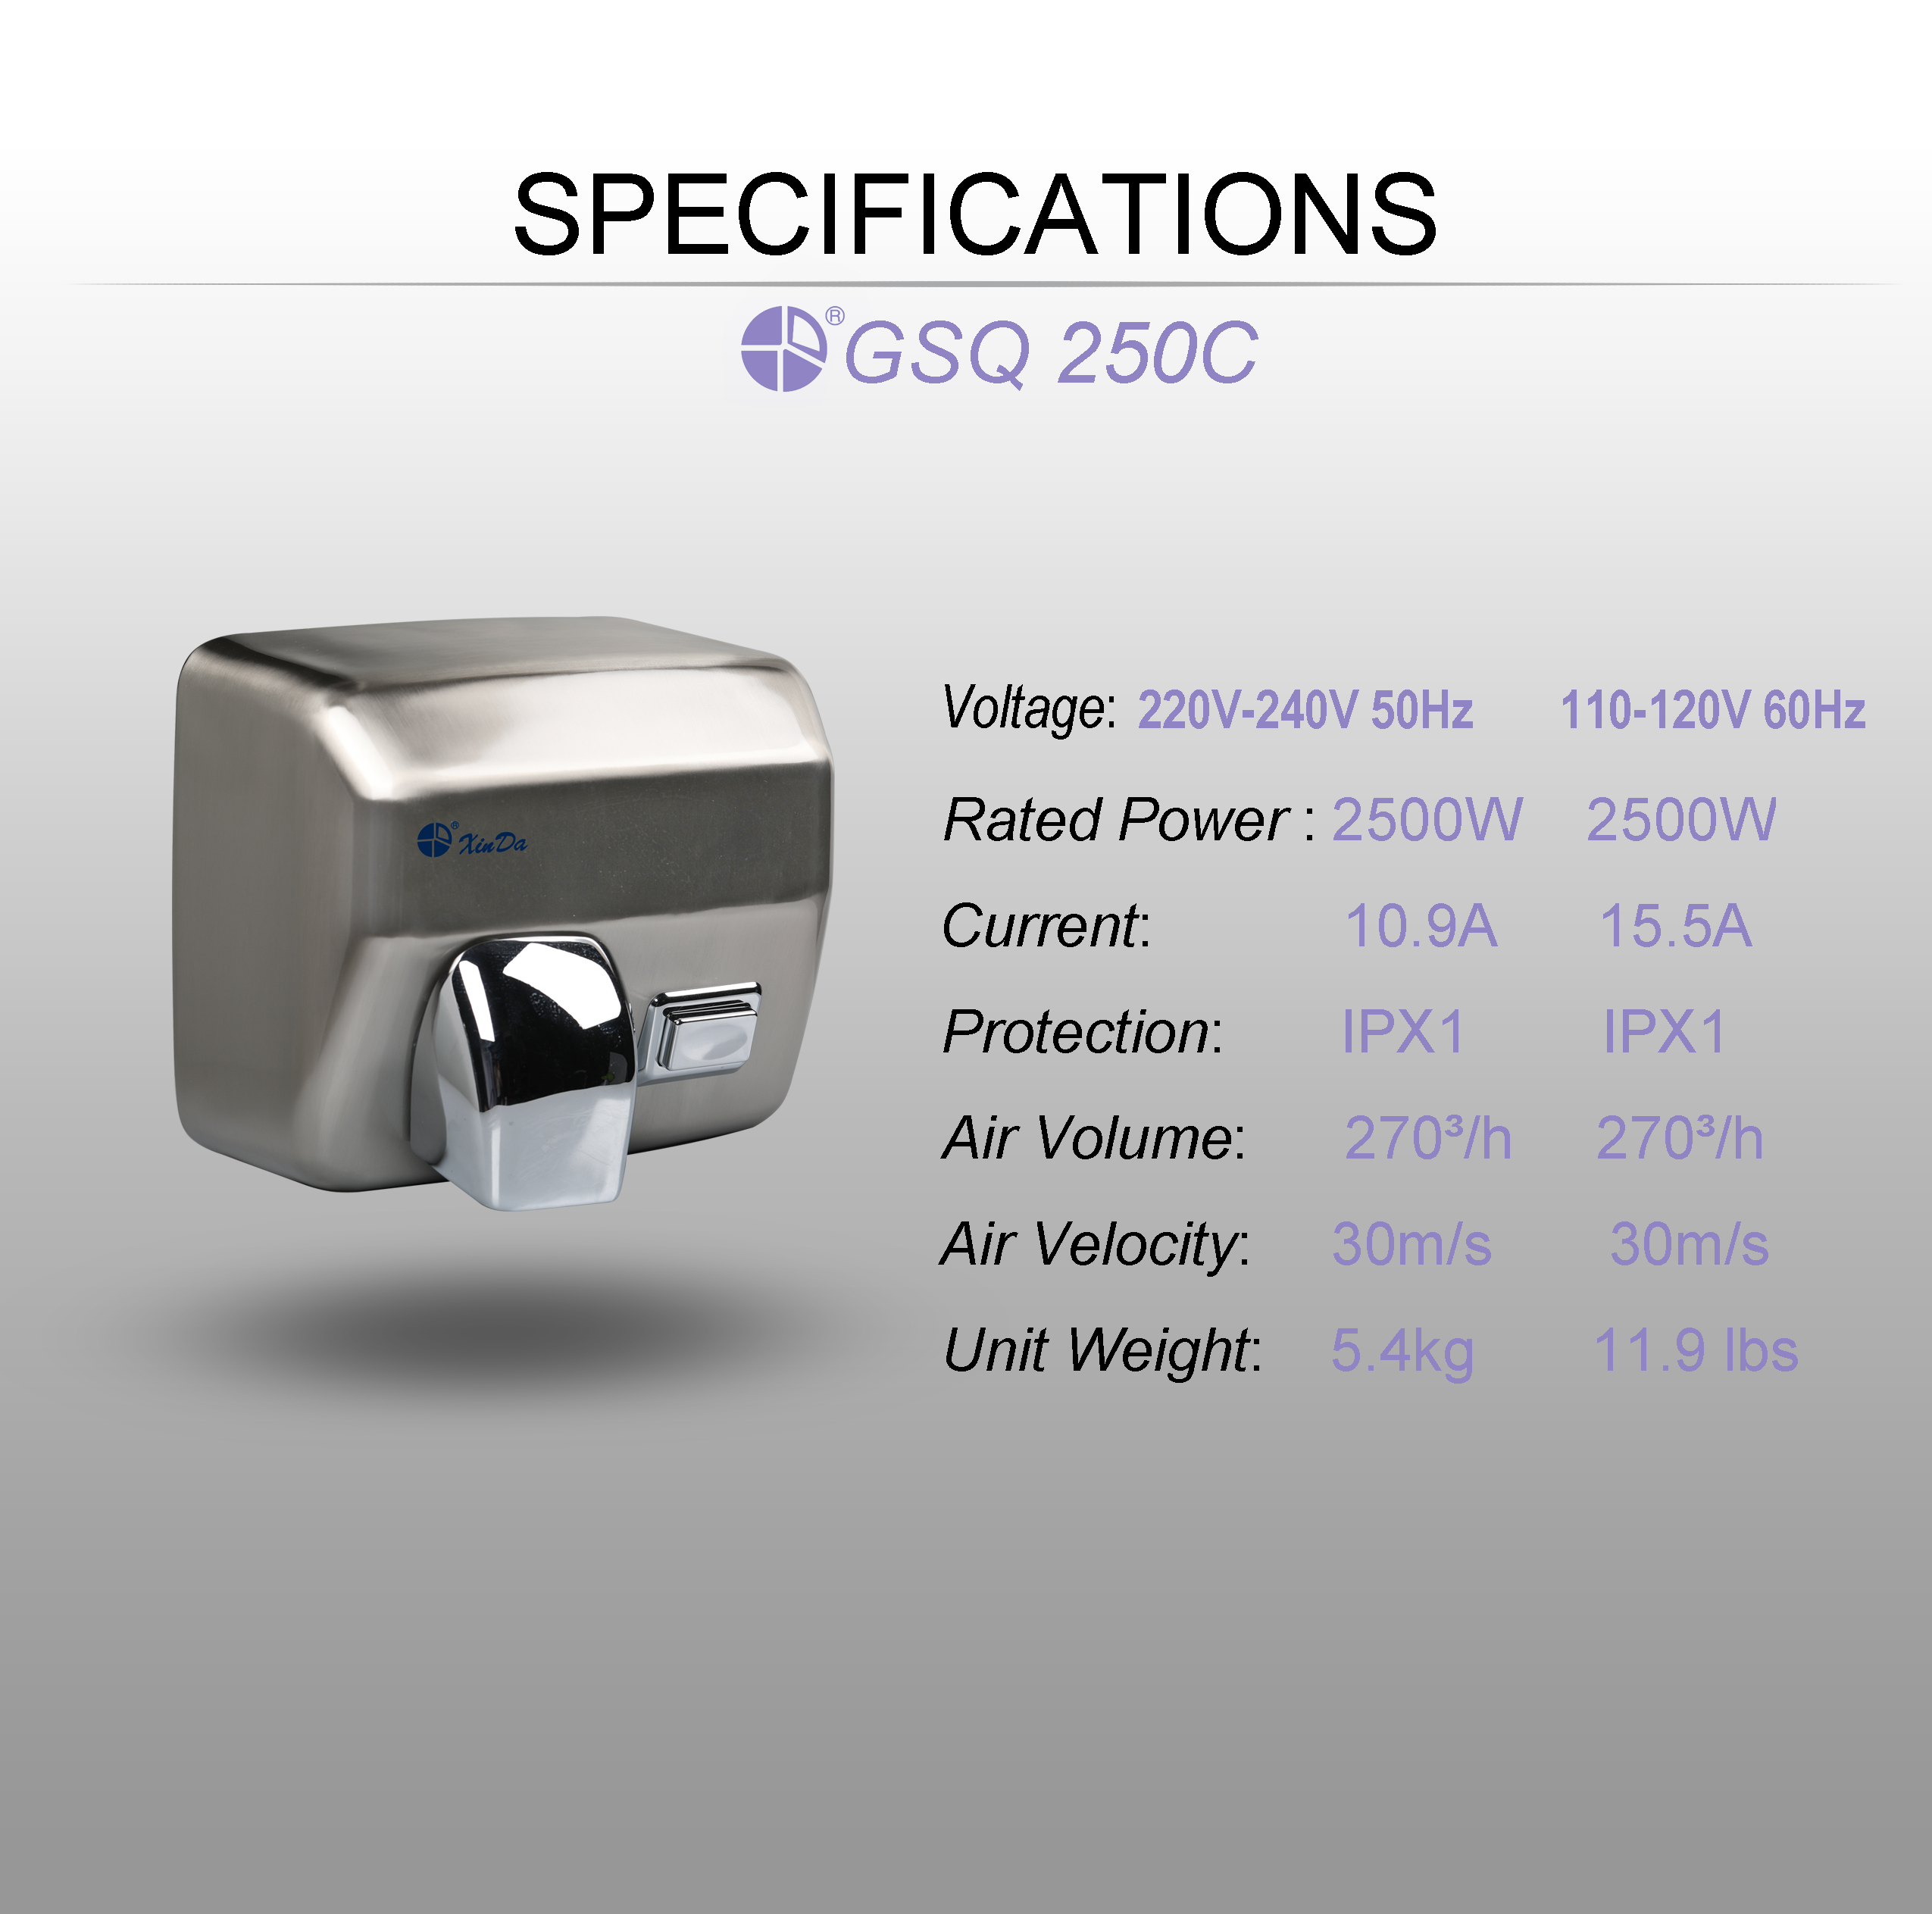 The XinDa GSQ250C Silver Wall Mounted Public Bathroom Hospital Toilet Hotel Accessories Commercia Hight-speed Hand Drier